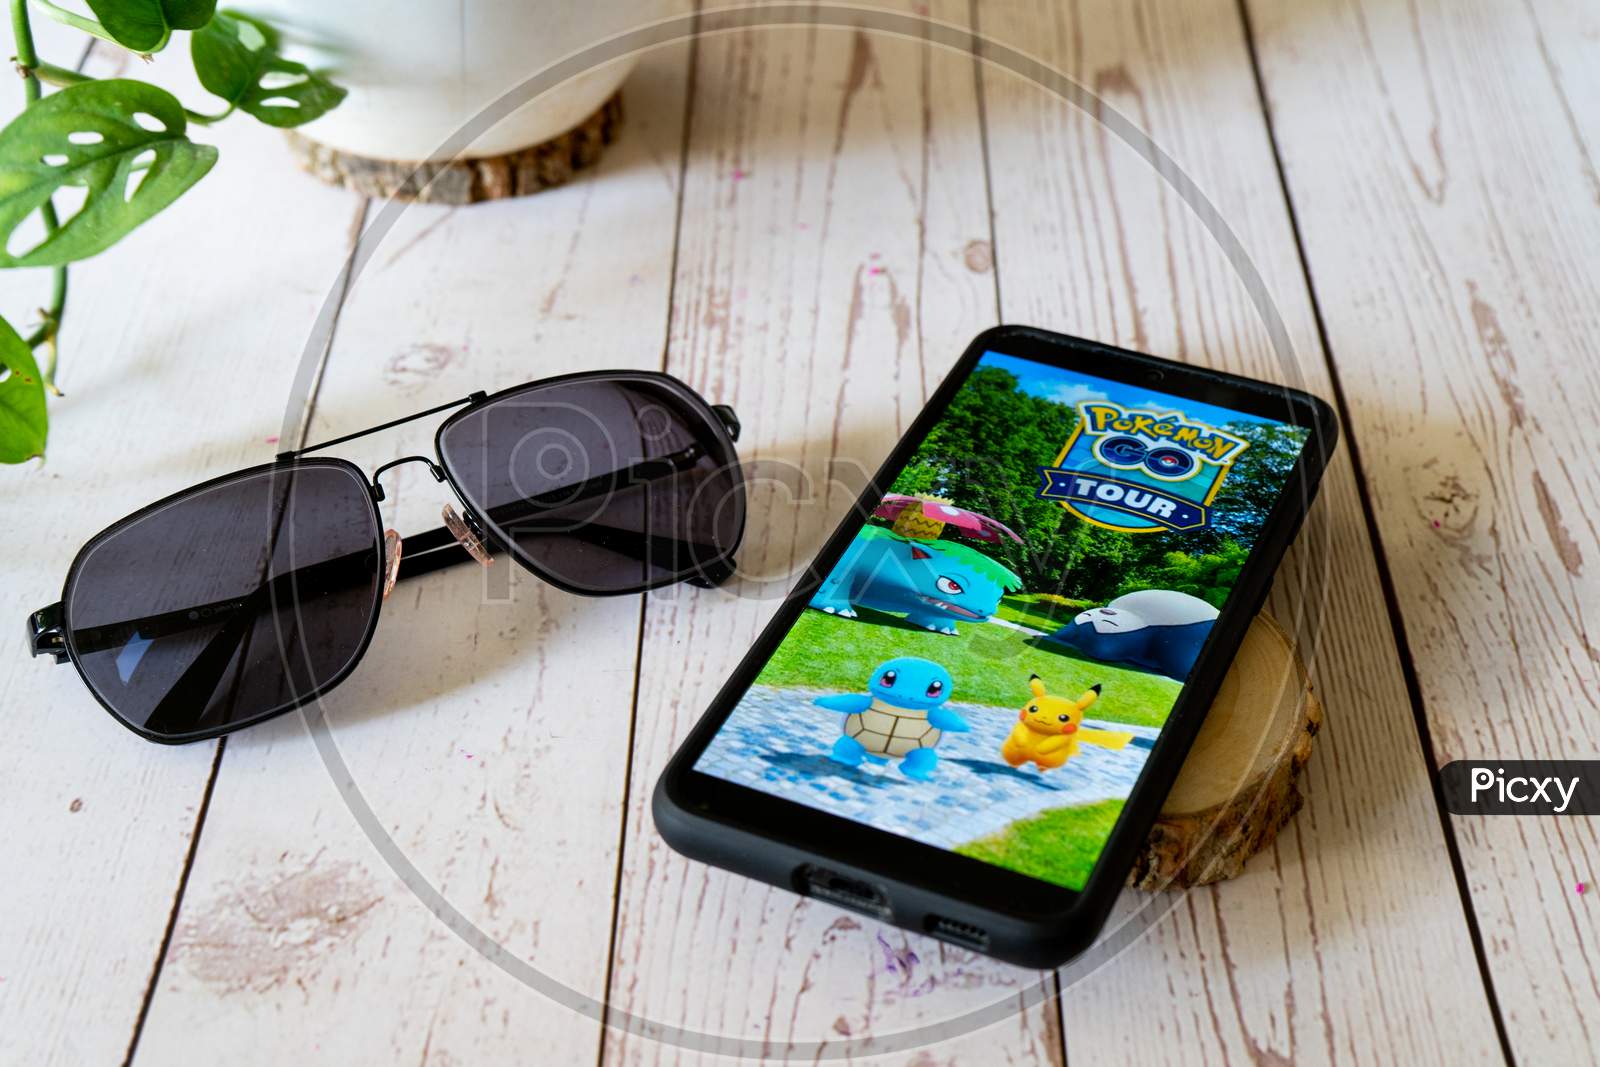 Famous Augmented Reality Virtual Game Pokemon Go Tour Playing On A Mobile Phone On A Wooden Table Outdoors With Plants Goggles Showing People Enjoying This Multiplayer Game